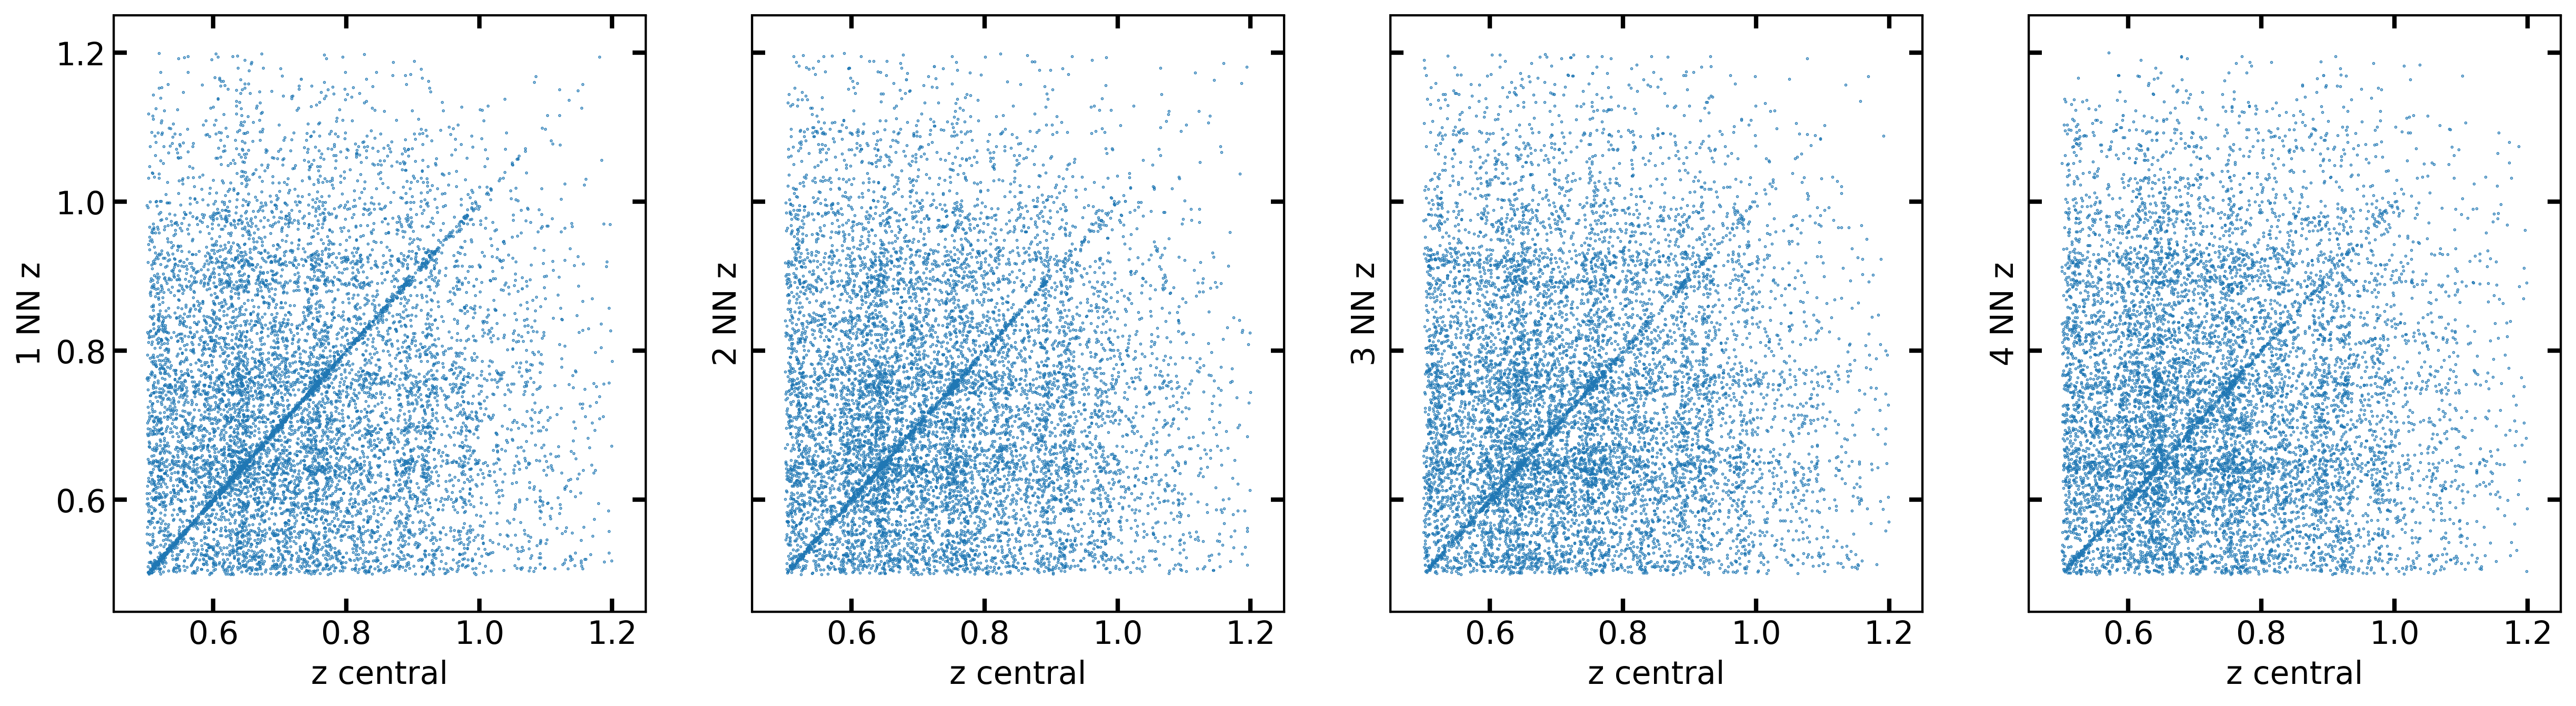 Correlation between a galaxy own redshift and that of its $n^{th}$ nearest angular neighbour ($n=\{1,2,3,4\}$, left to right), as seen in the VIPERS redshift survey data, which cover the range $0.5< z < 1.2$. Clearly, while a tight correlation exists for a number of objects, many other angular pairs just correspond to chance superpositions.